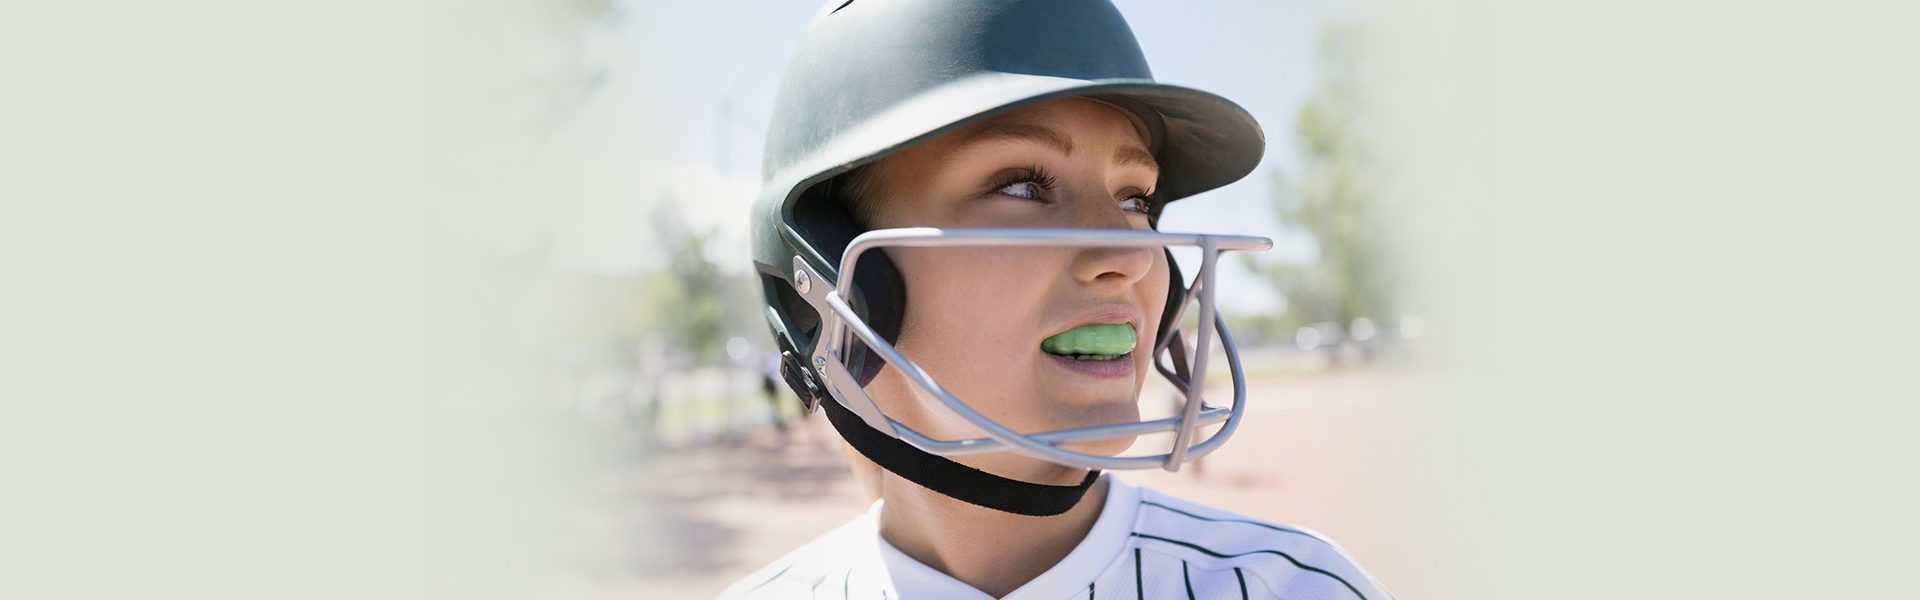 Before You Get Those Mouth Guards, Here Is What You Need To Know From A Professional